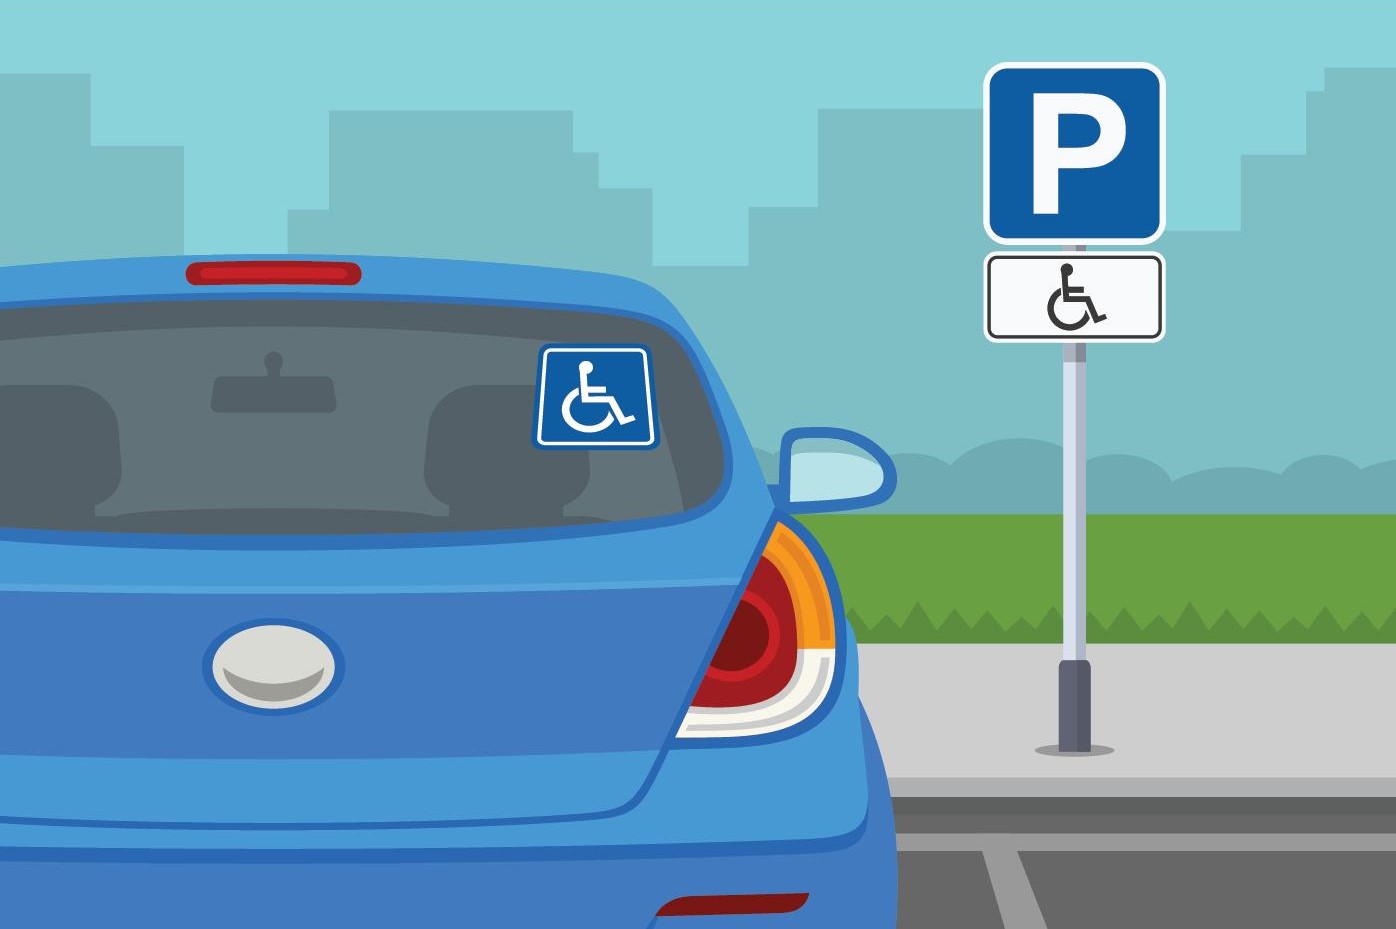 Graphic of a car parked in a disabled spot